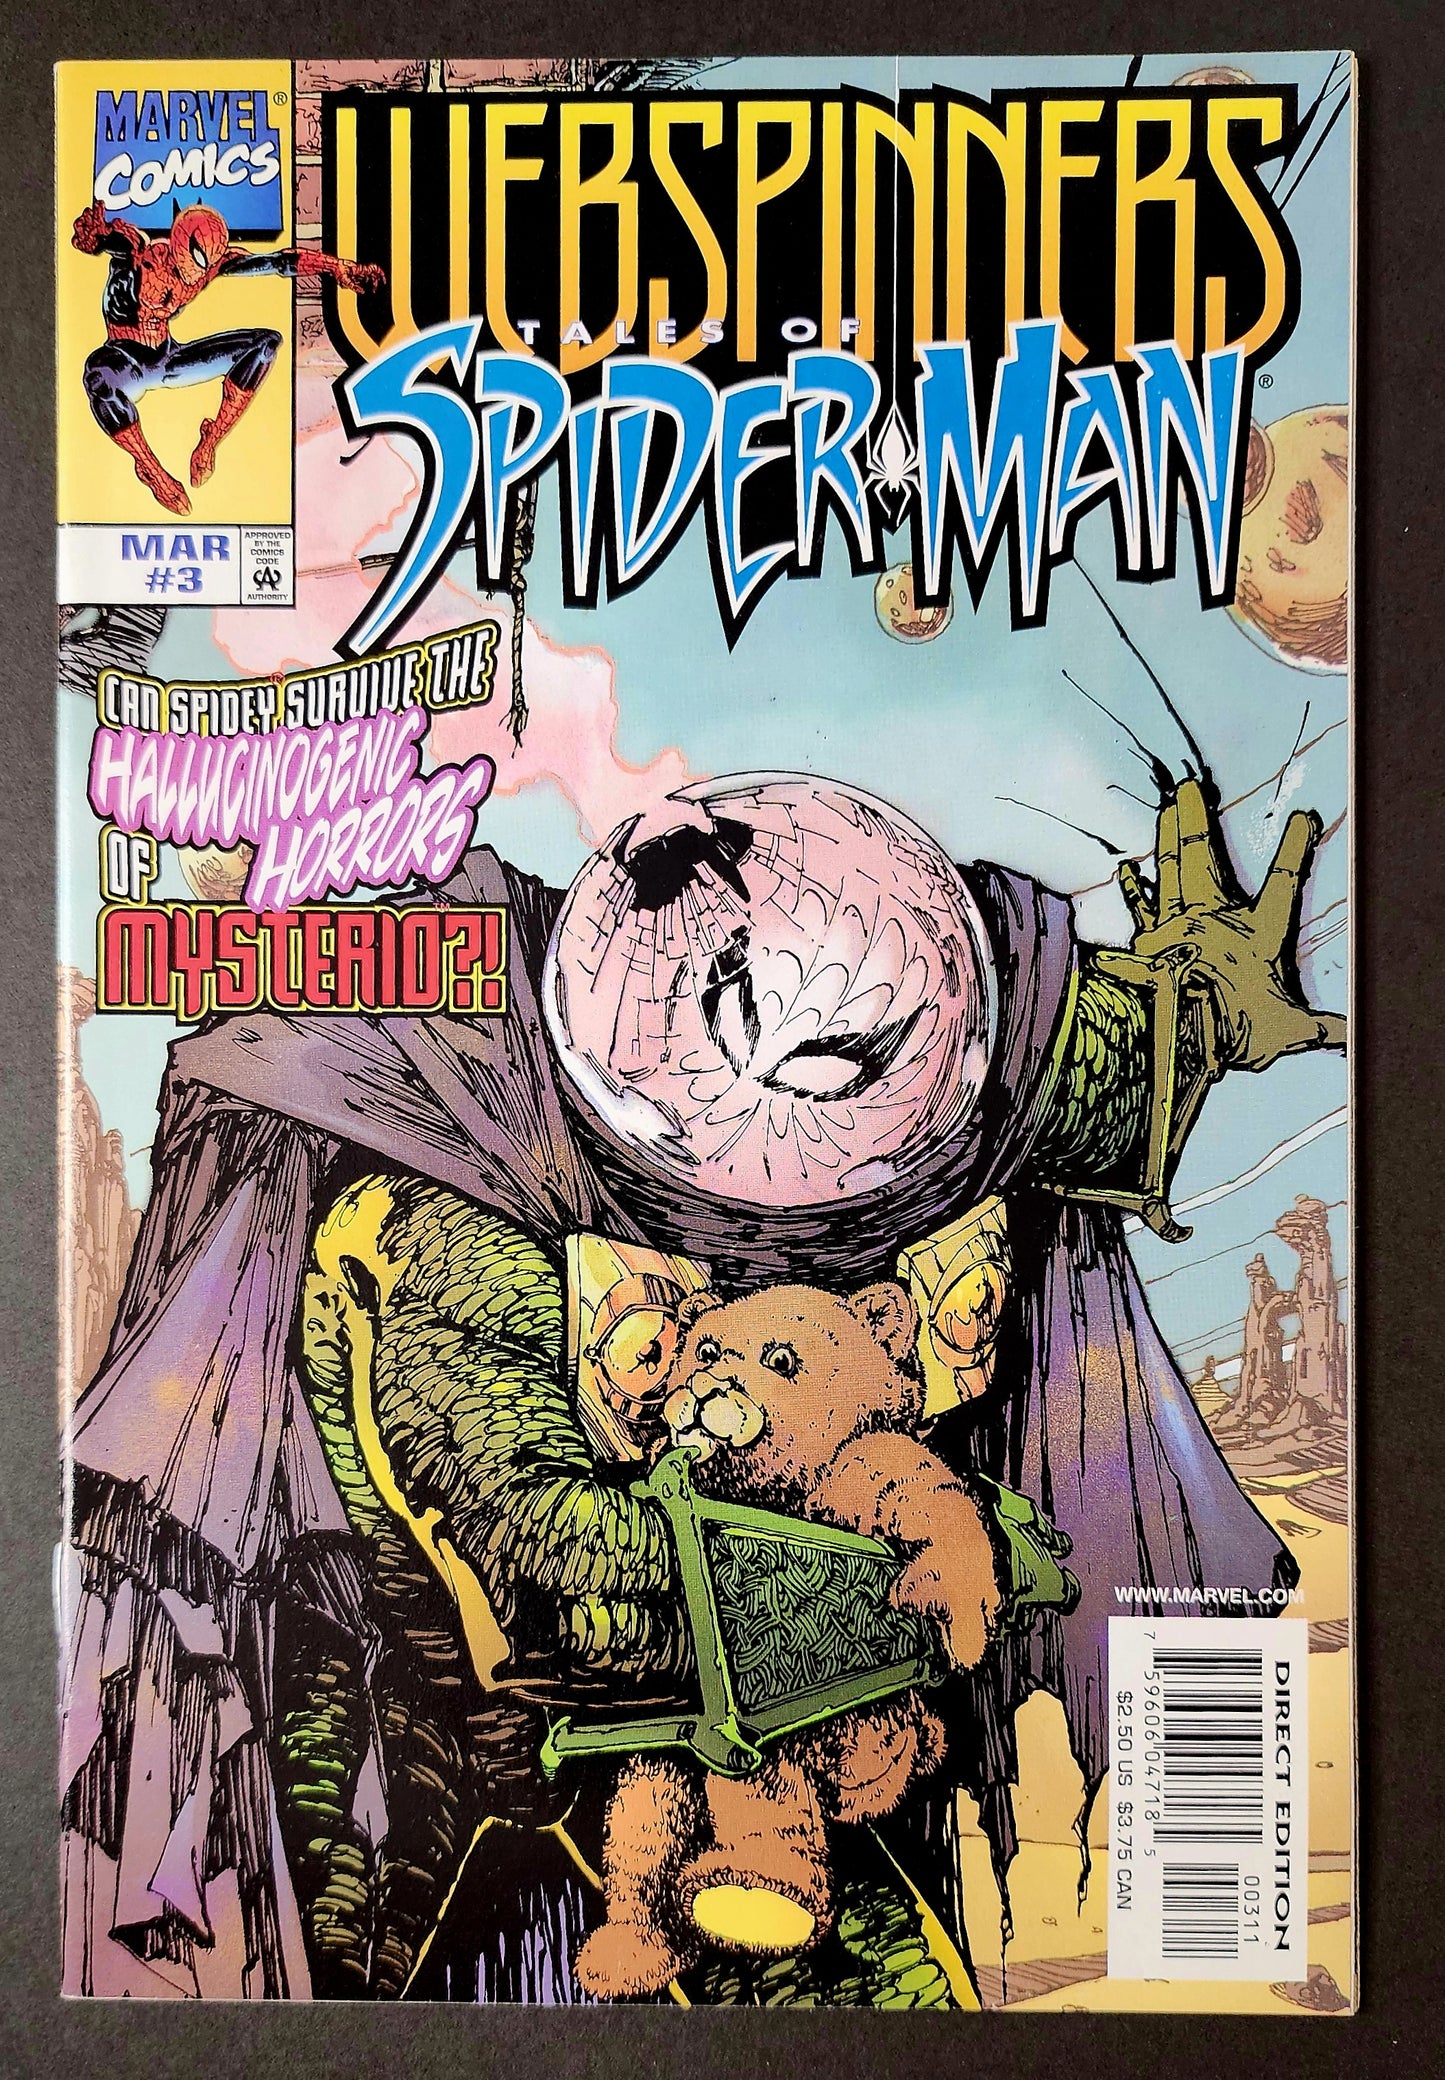 Webspinners: Tales of Spider-Man #3 (FN+)